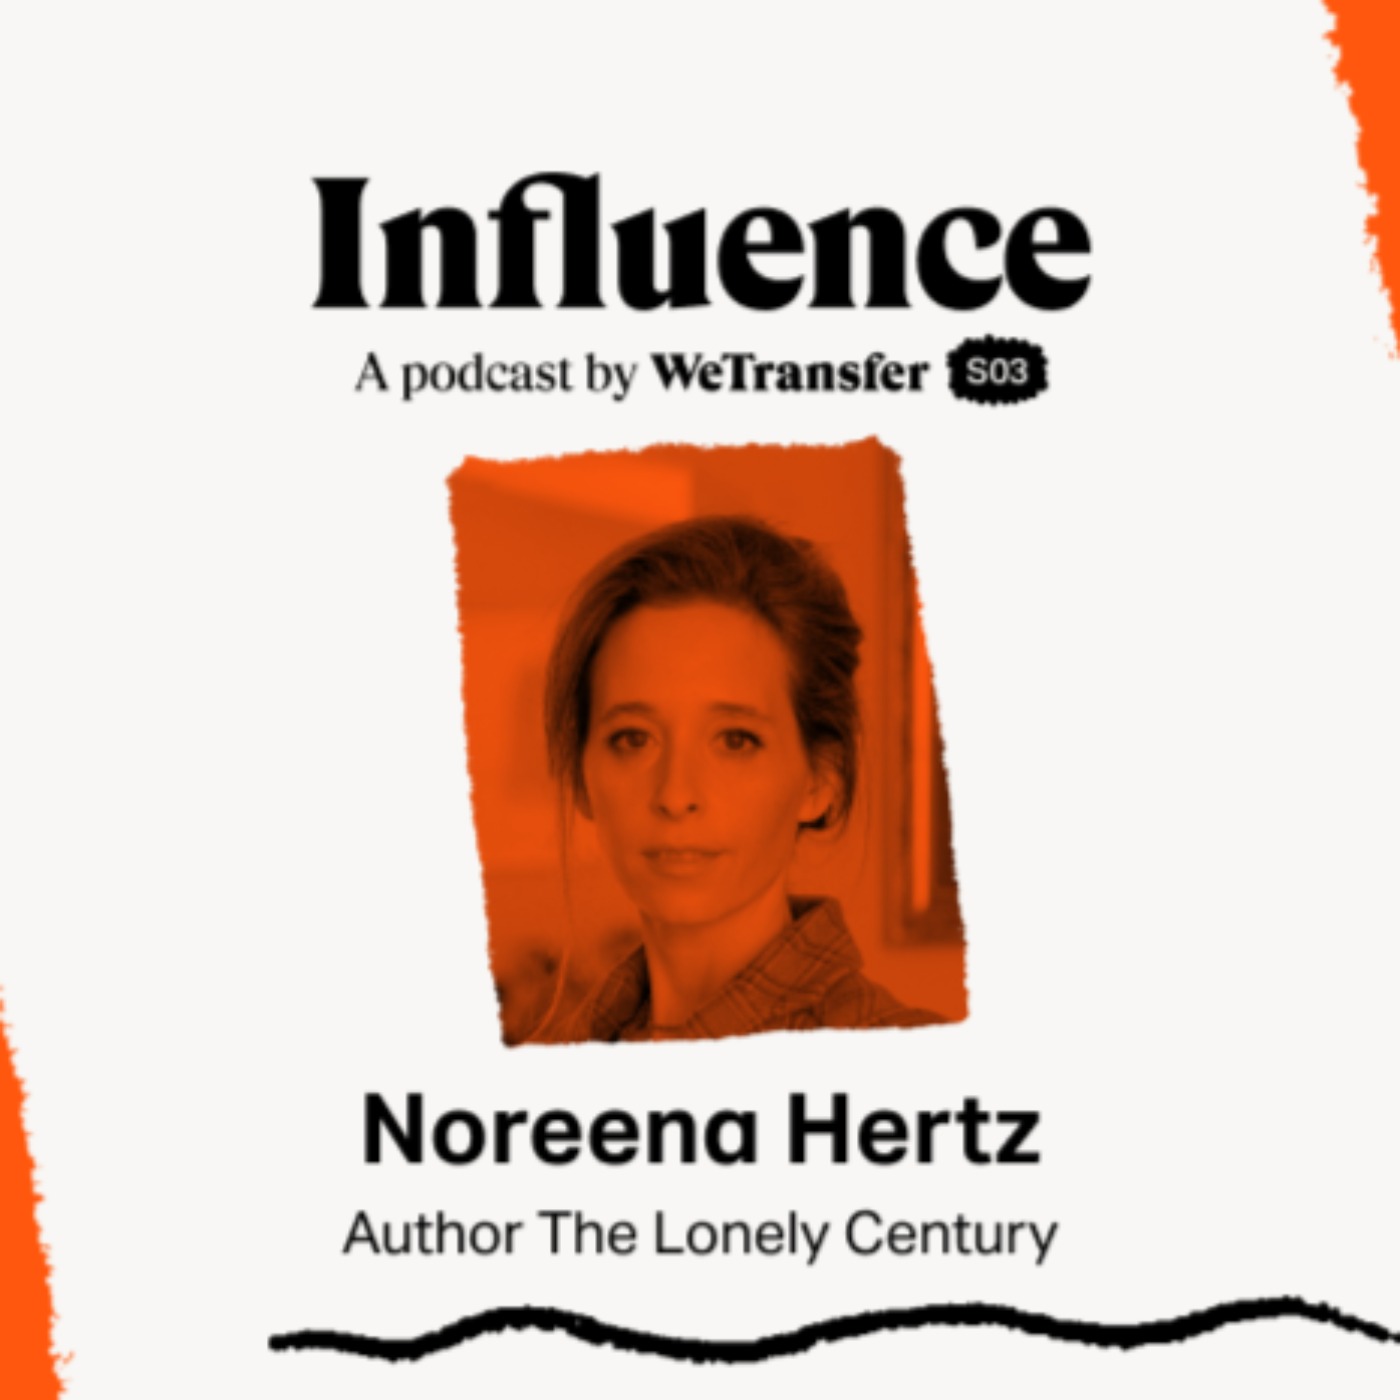 Noreena Hertz on Generation Lonely and Craving Connection